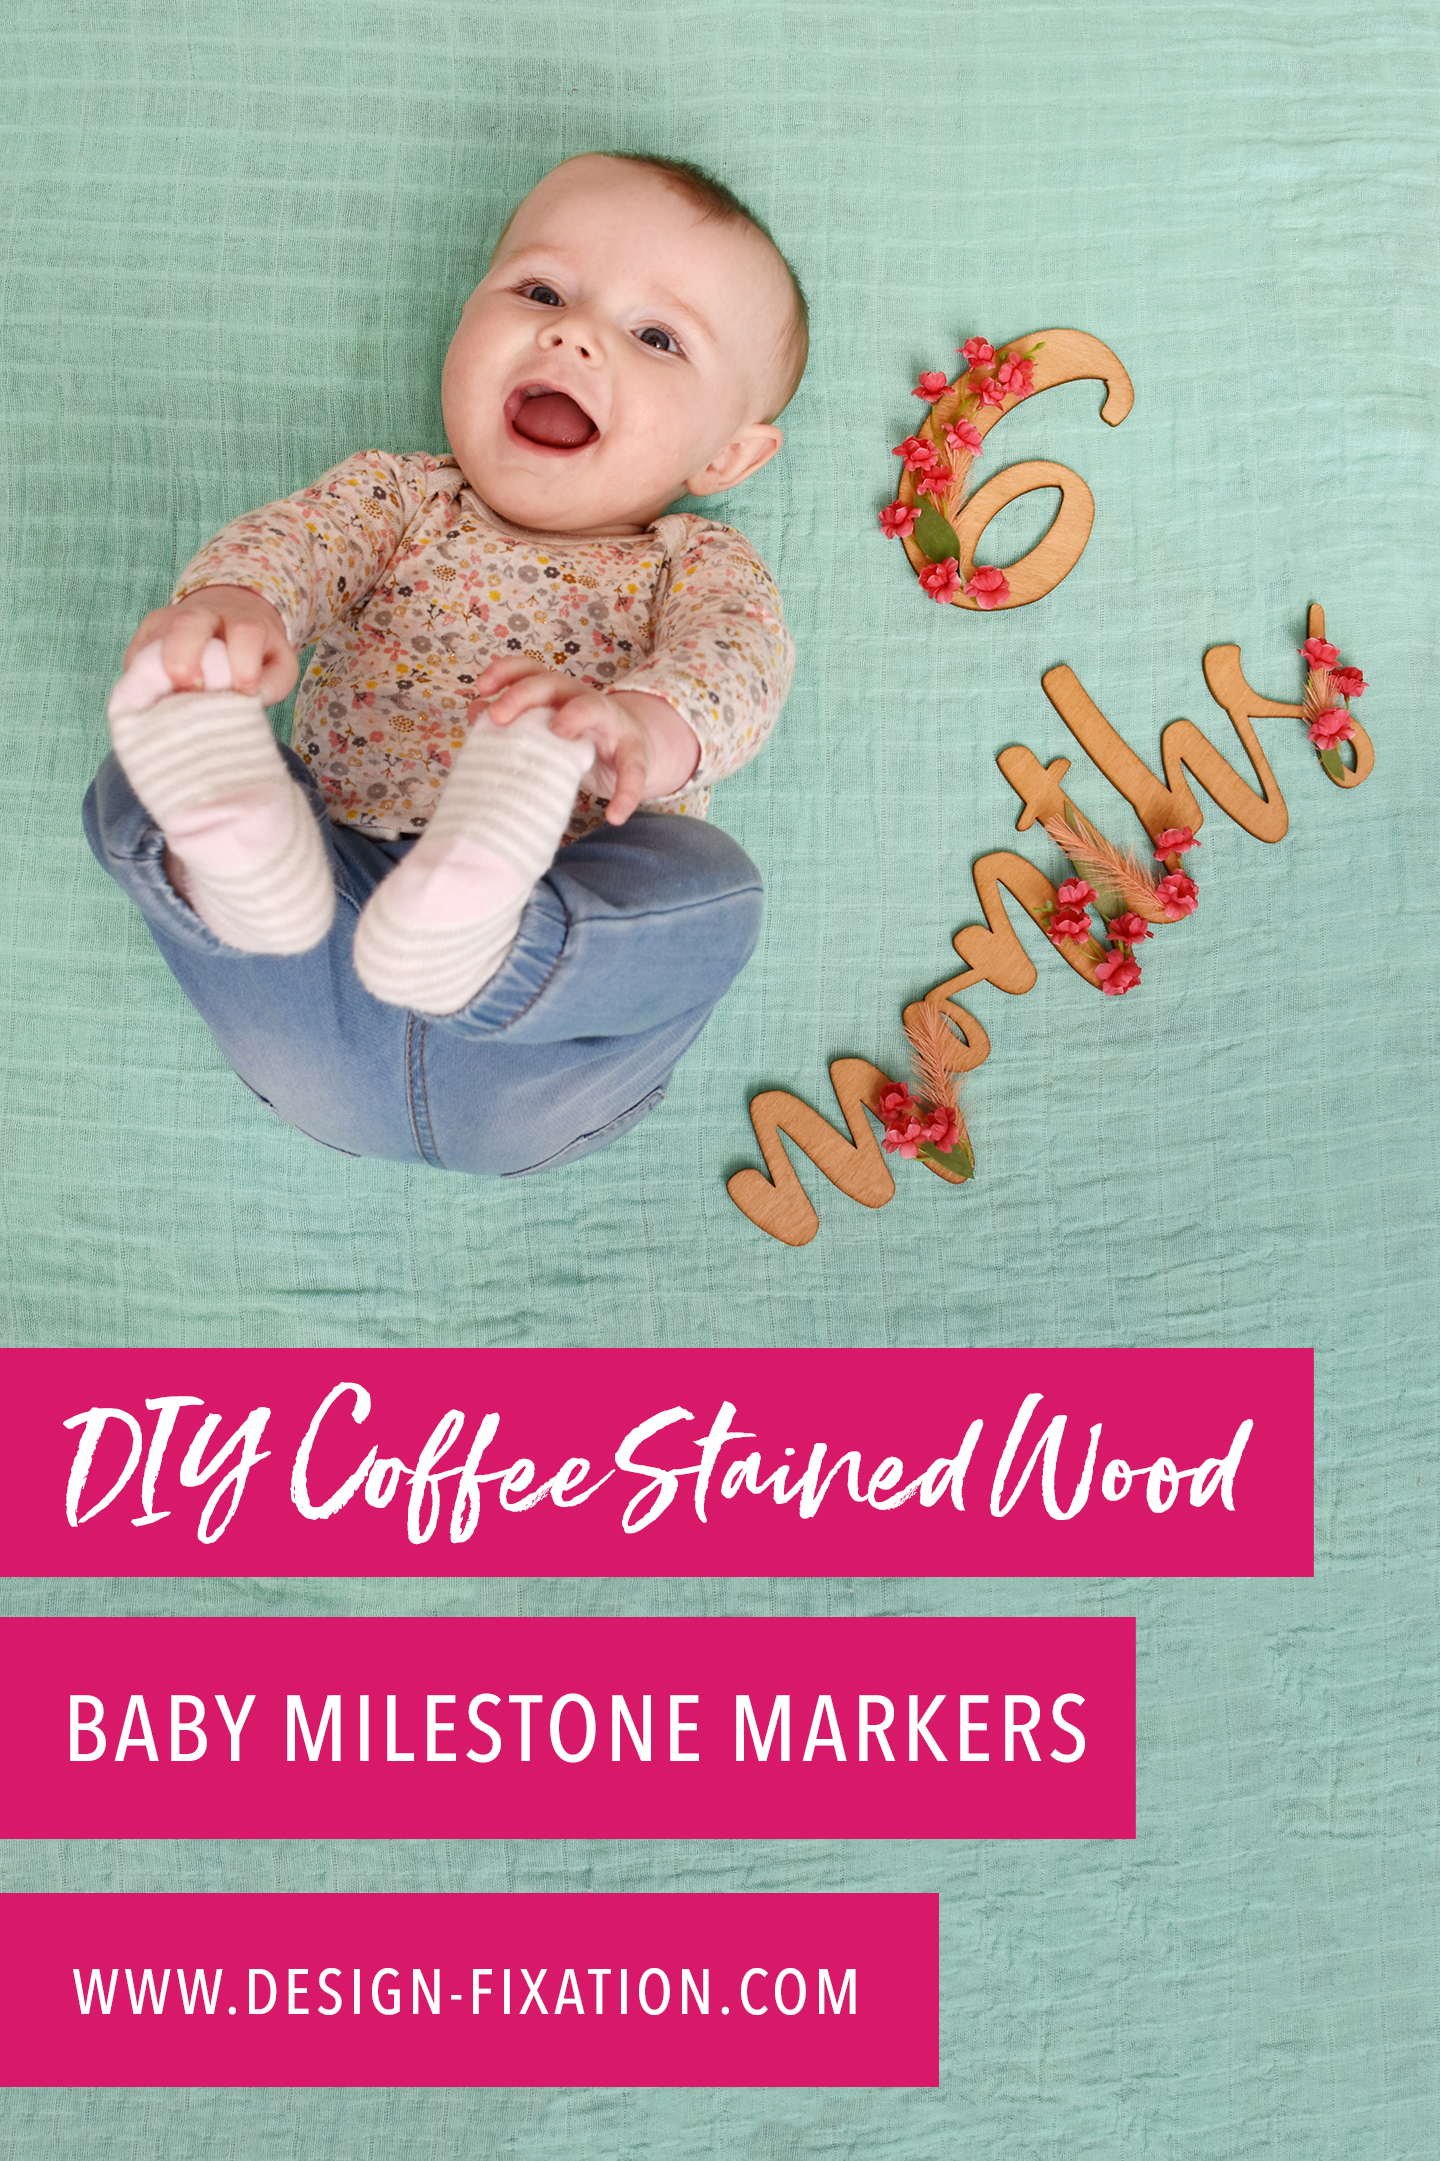 DIY Coffee Stained Wood Baby Milestone Markers /// By Faith Provencher of Design Fixation #baby #mom #shower_gift #floral #coffee